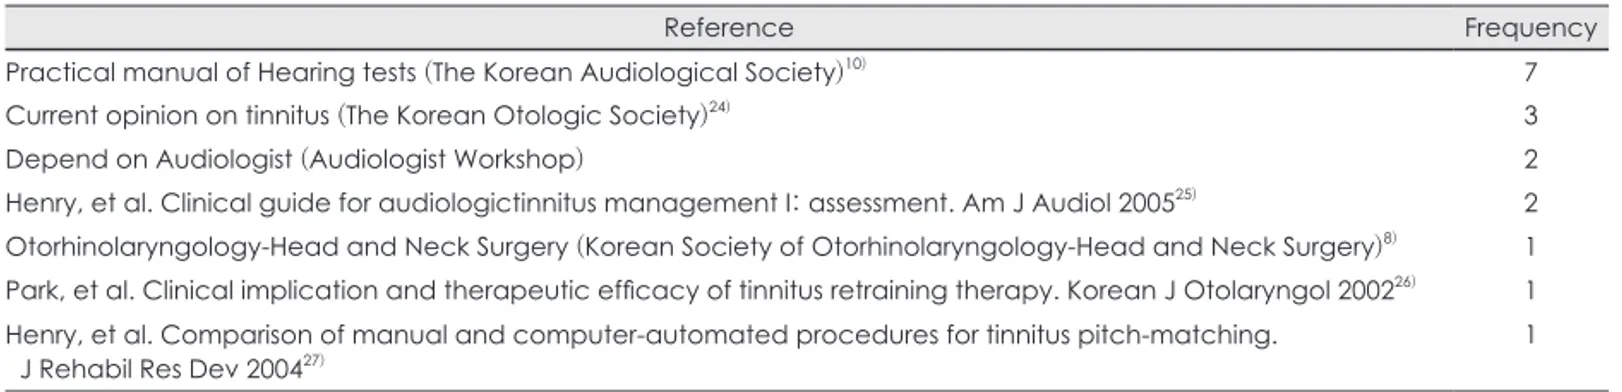 Table 1. Preferred references for the psychophysic measurement of tinntus